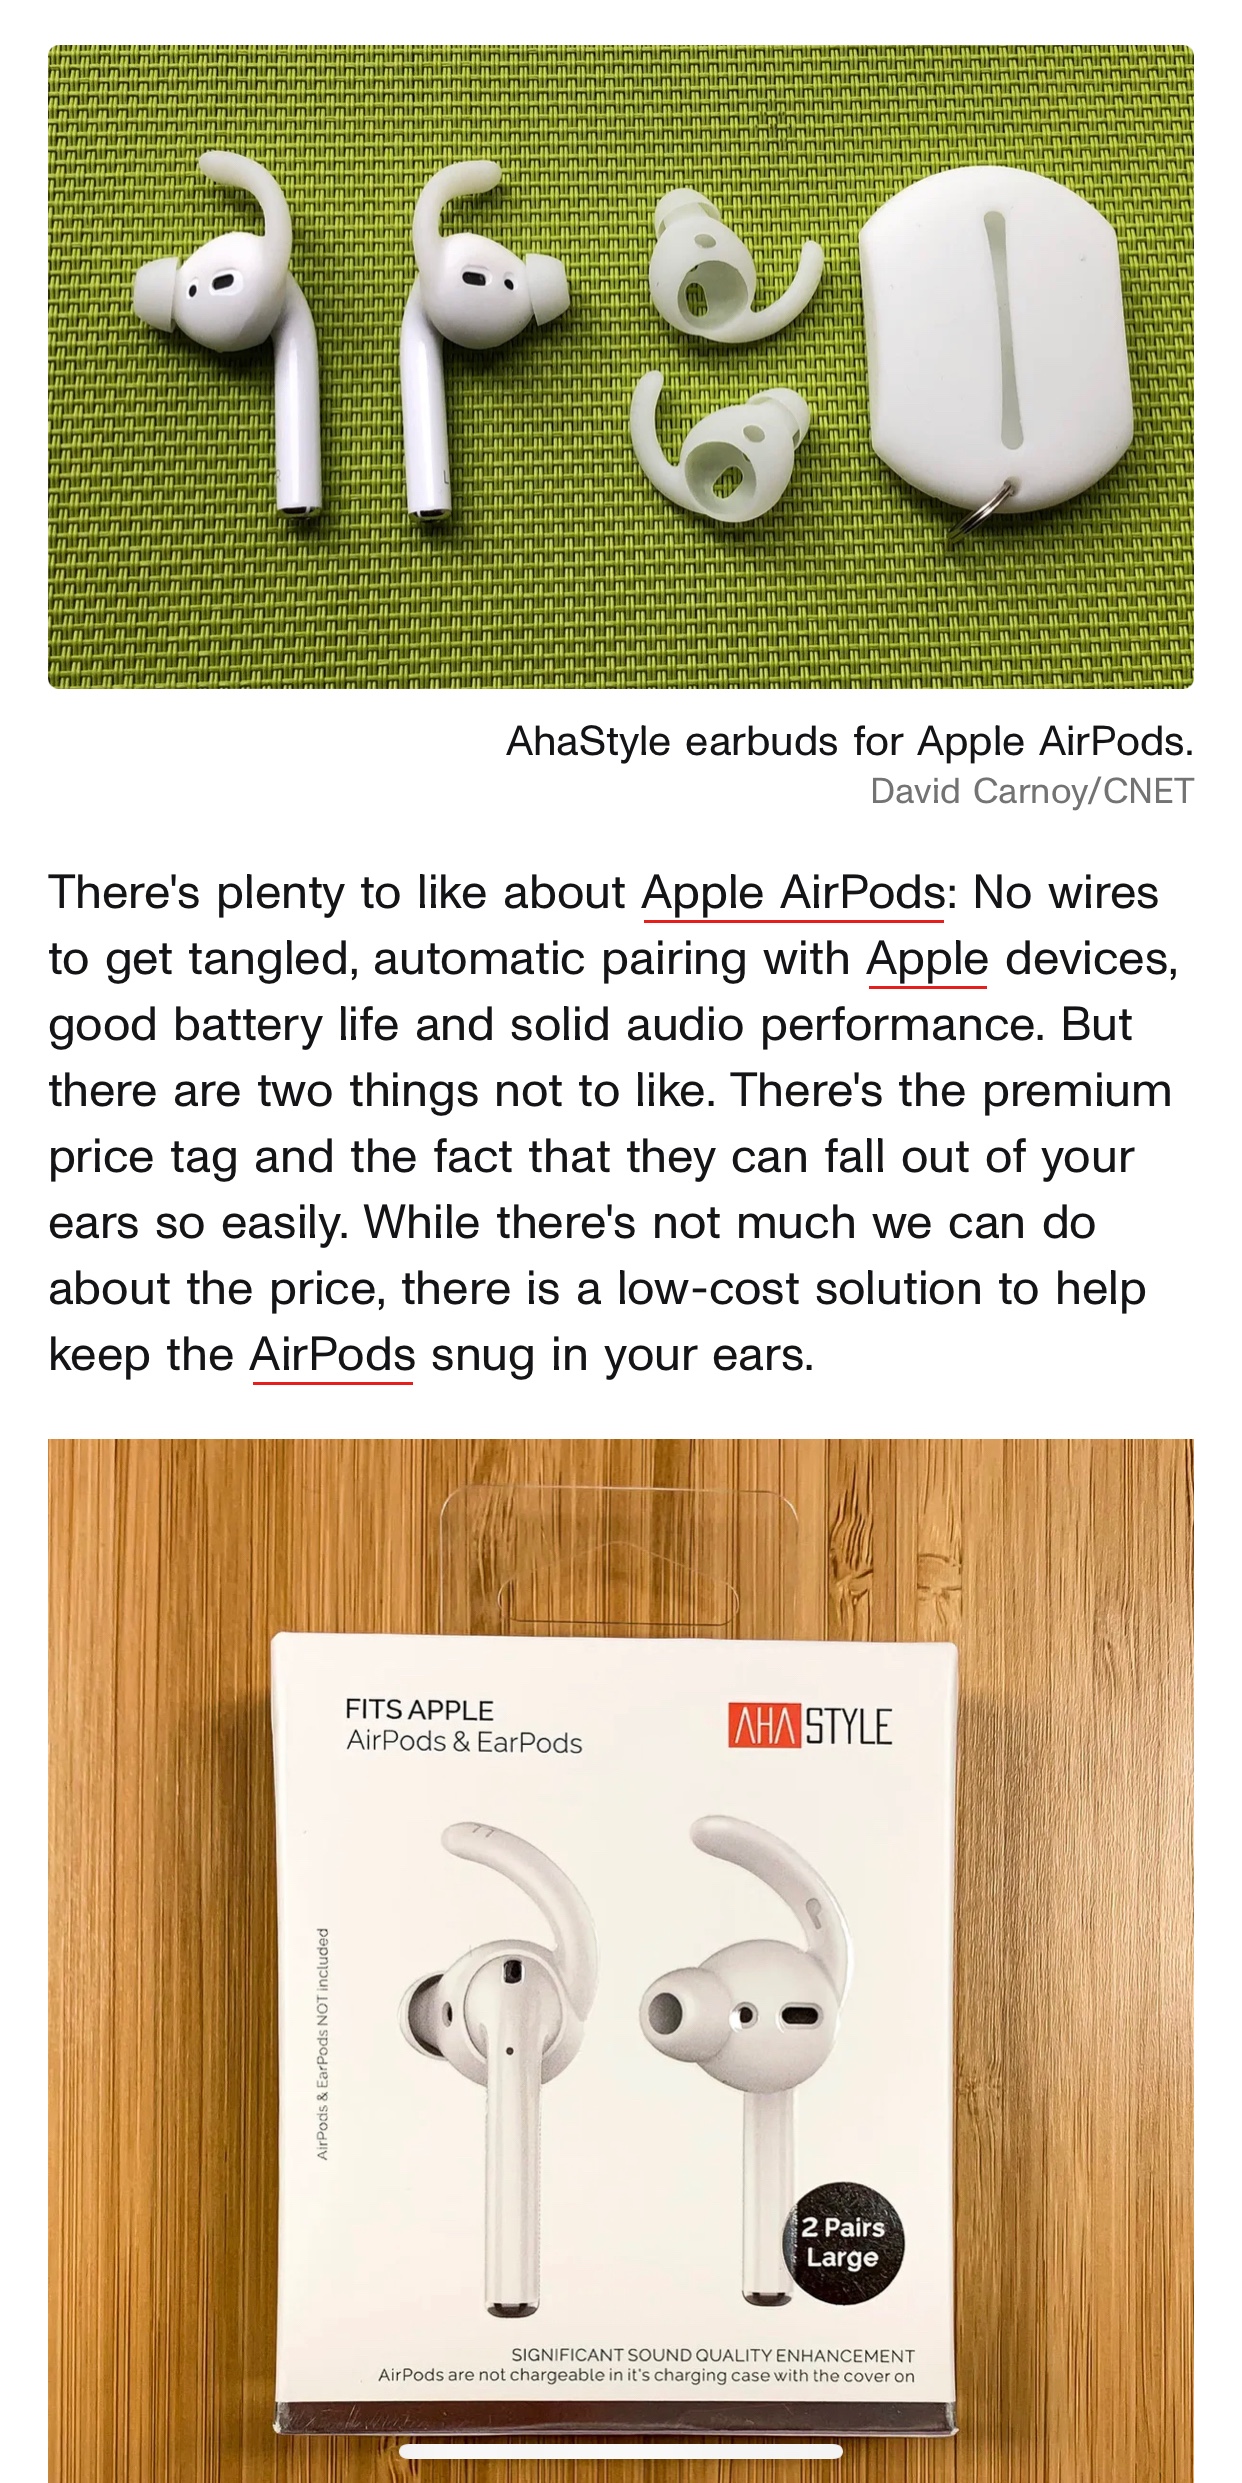 How to Keep Your Apple AirPods From Slipping Out of Your Ears